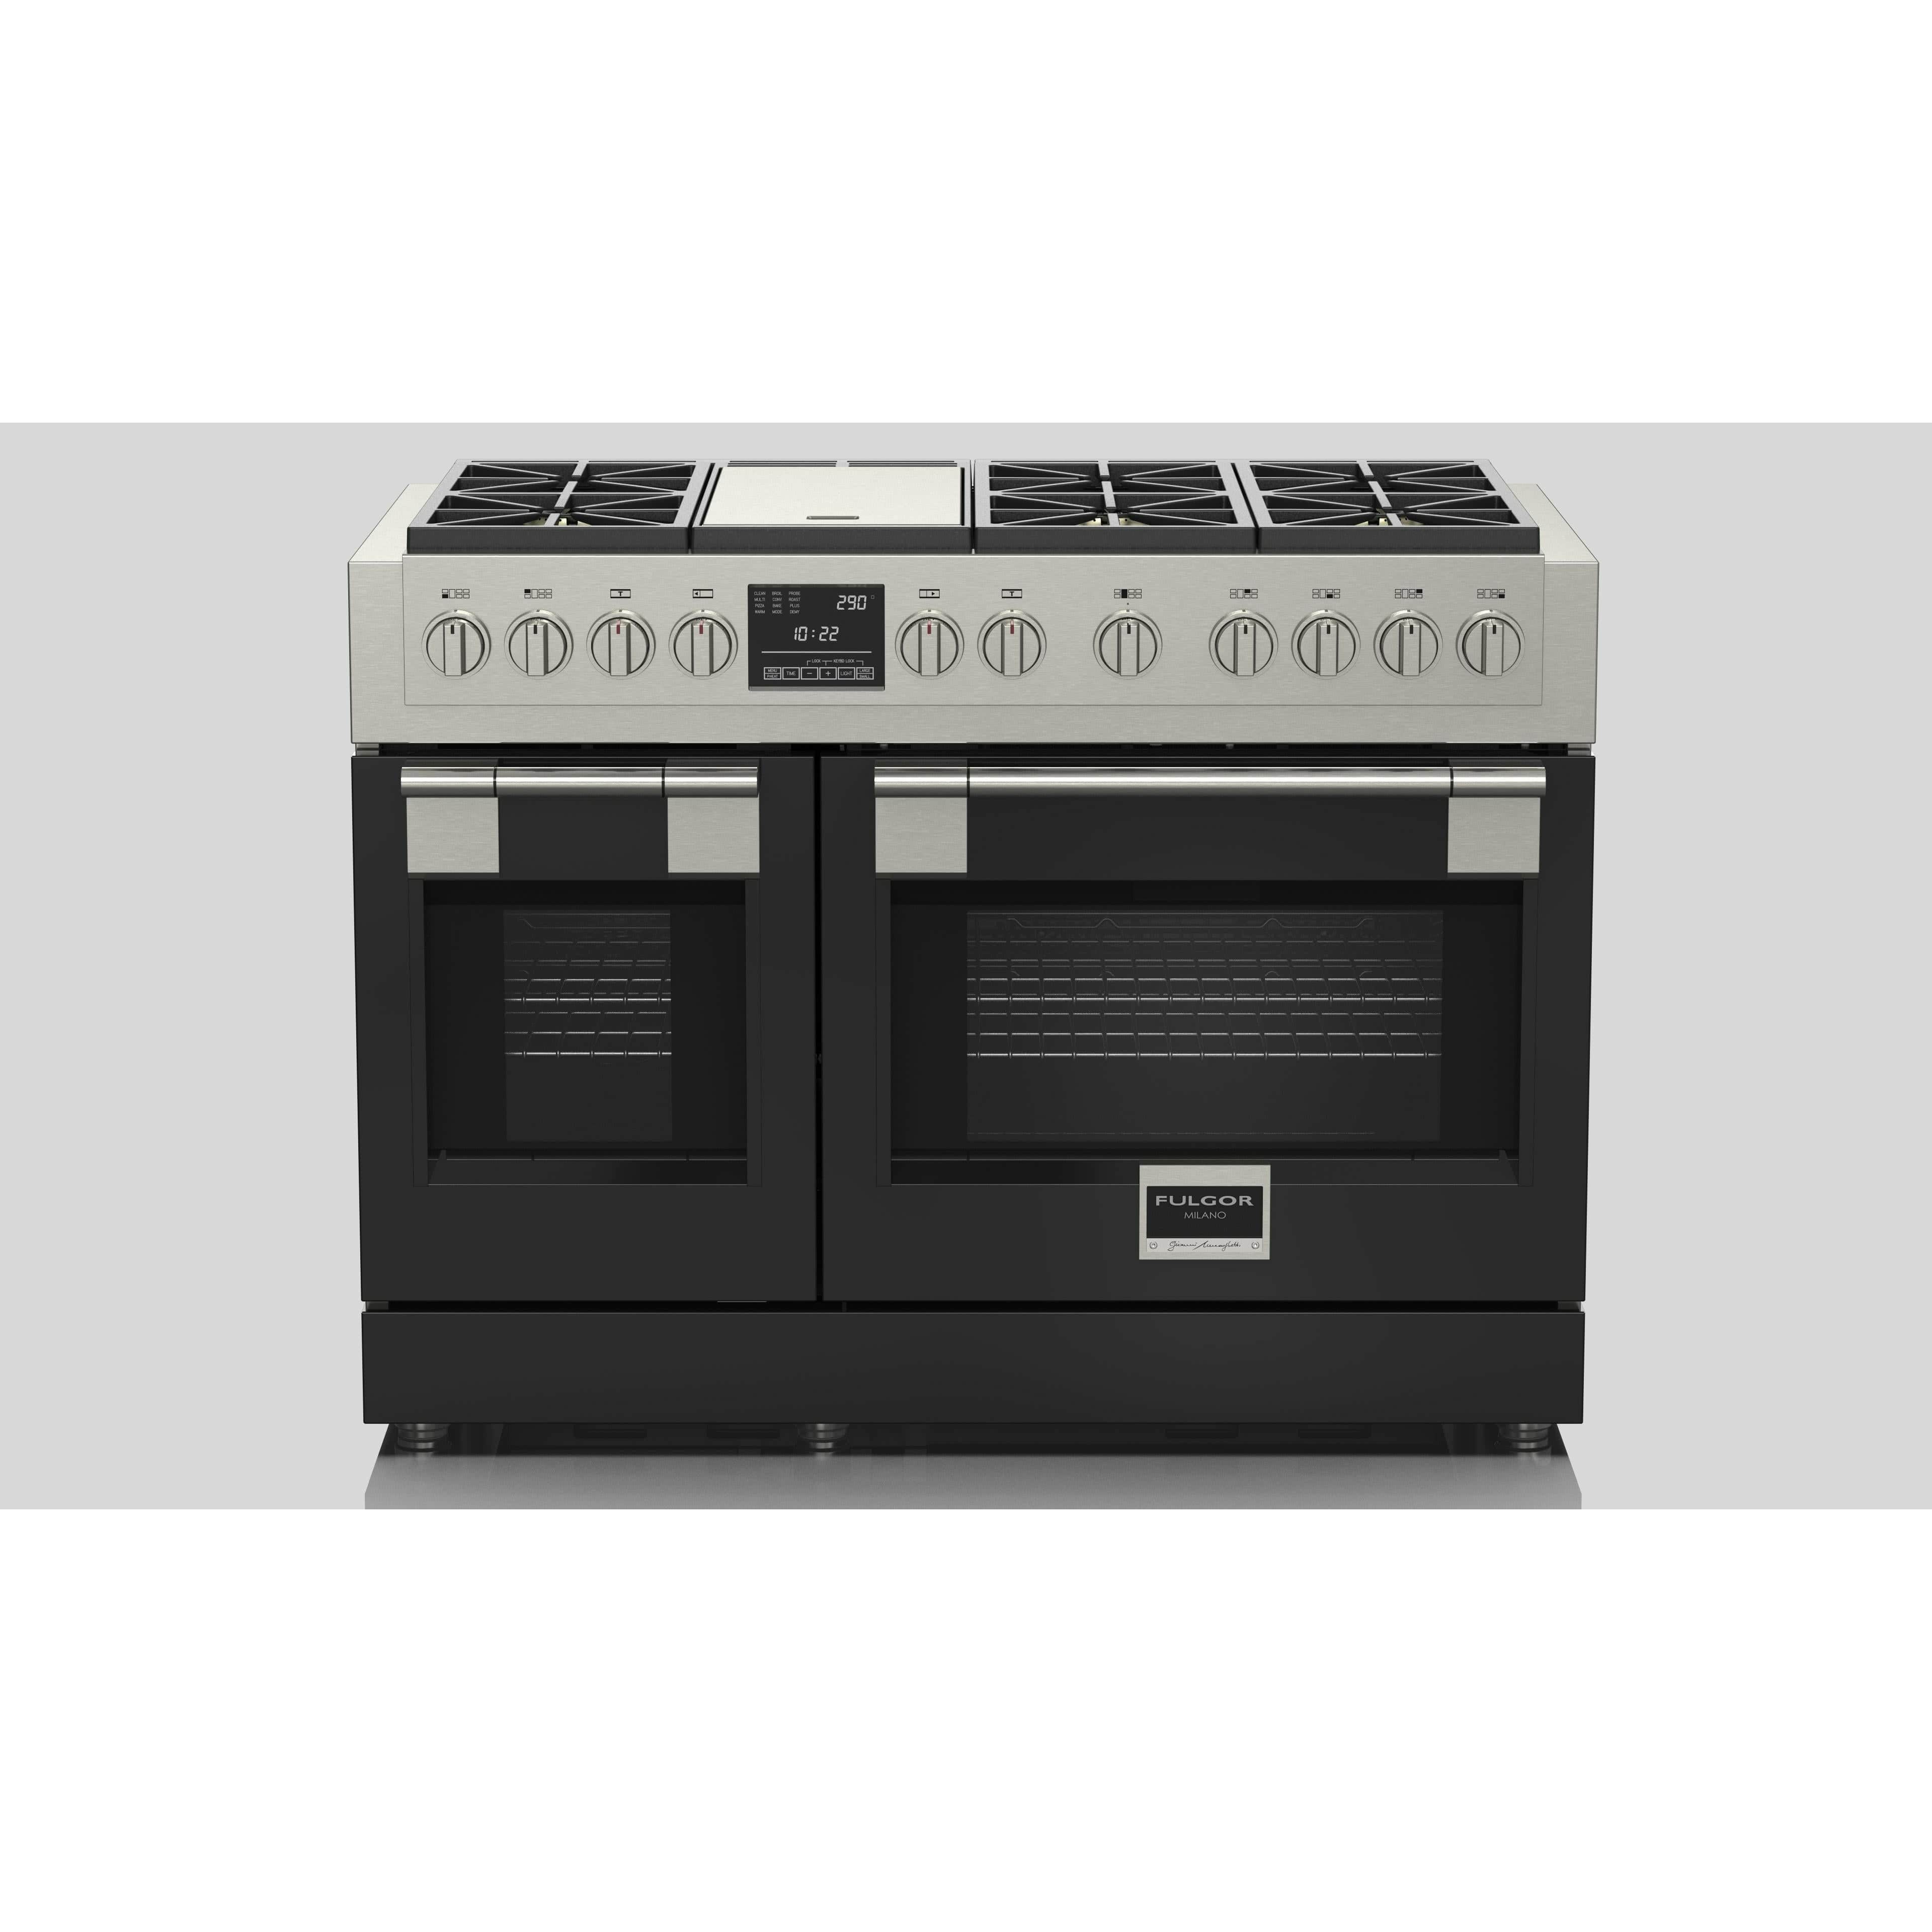 Fulgor Milano 48" Dual Fuel Professional Range with 6 Dual Flame Burners,  6.5 Cu. Ft. Total Capacity Stainless Steel - F6PDF486GS1 Ranges PDRKIT48BK Luxury Appliances Direct